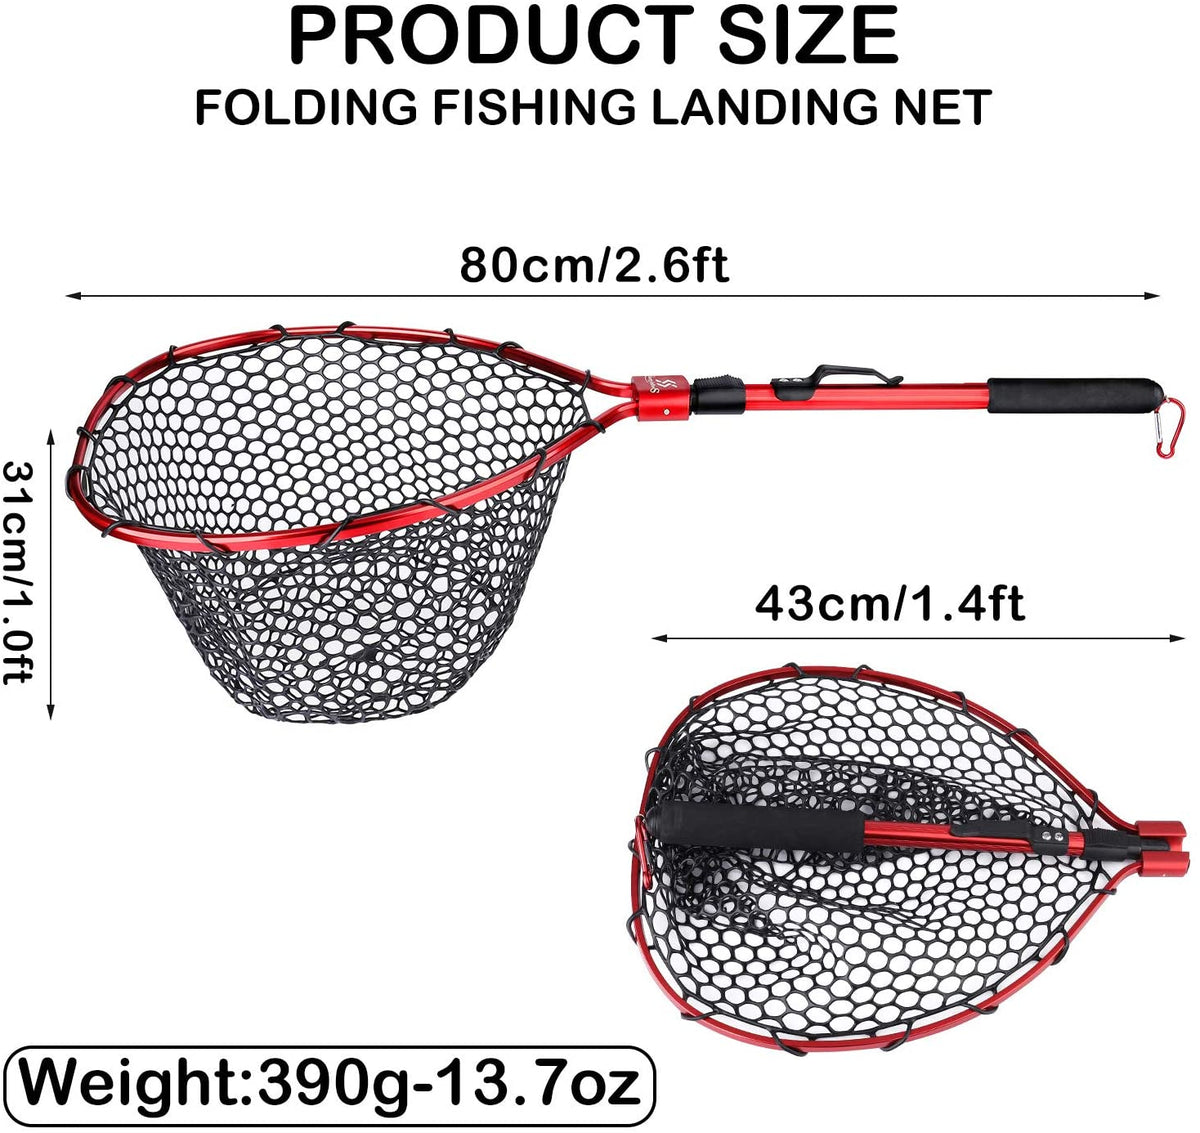  Aluminum Alloy Landing Net, Extendable Handle Smooth Silicone  Mesh Fishing Net, Foldable Rubber Net Mesh, Suitable for Freshwater,  Saltwater Fishing (Black) : Sports & Outdoors